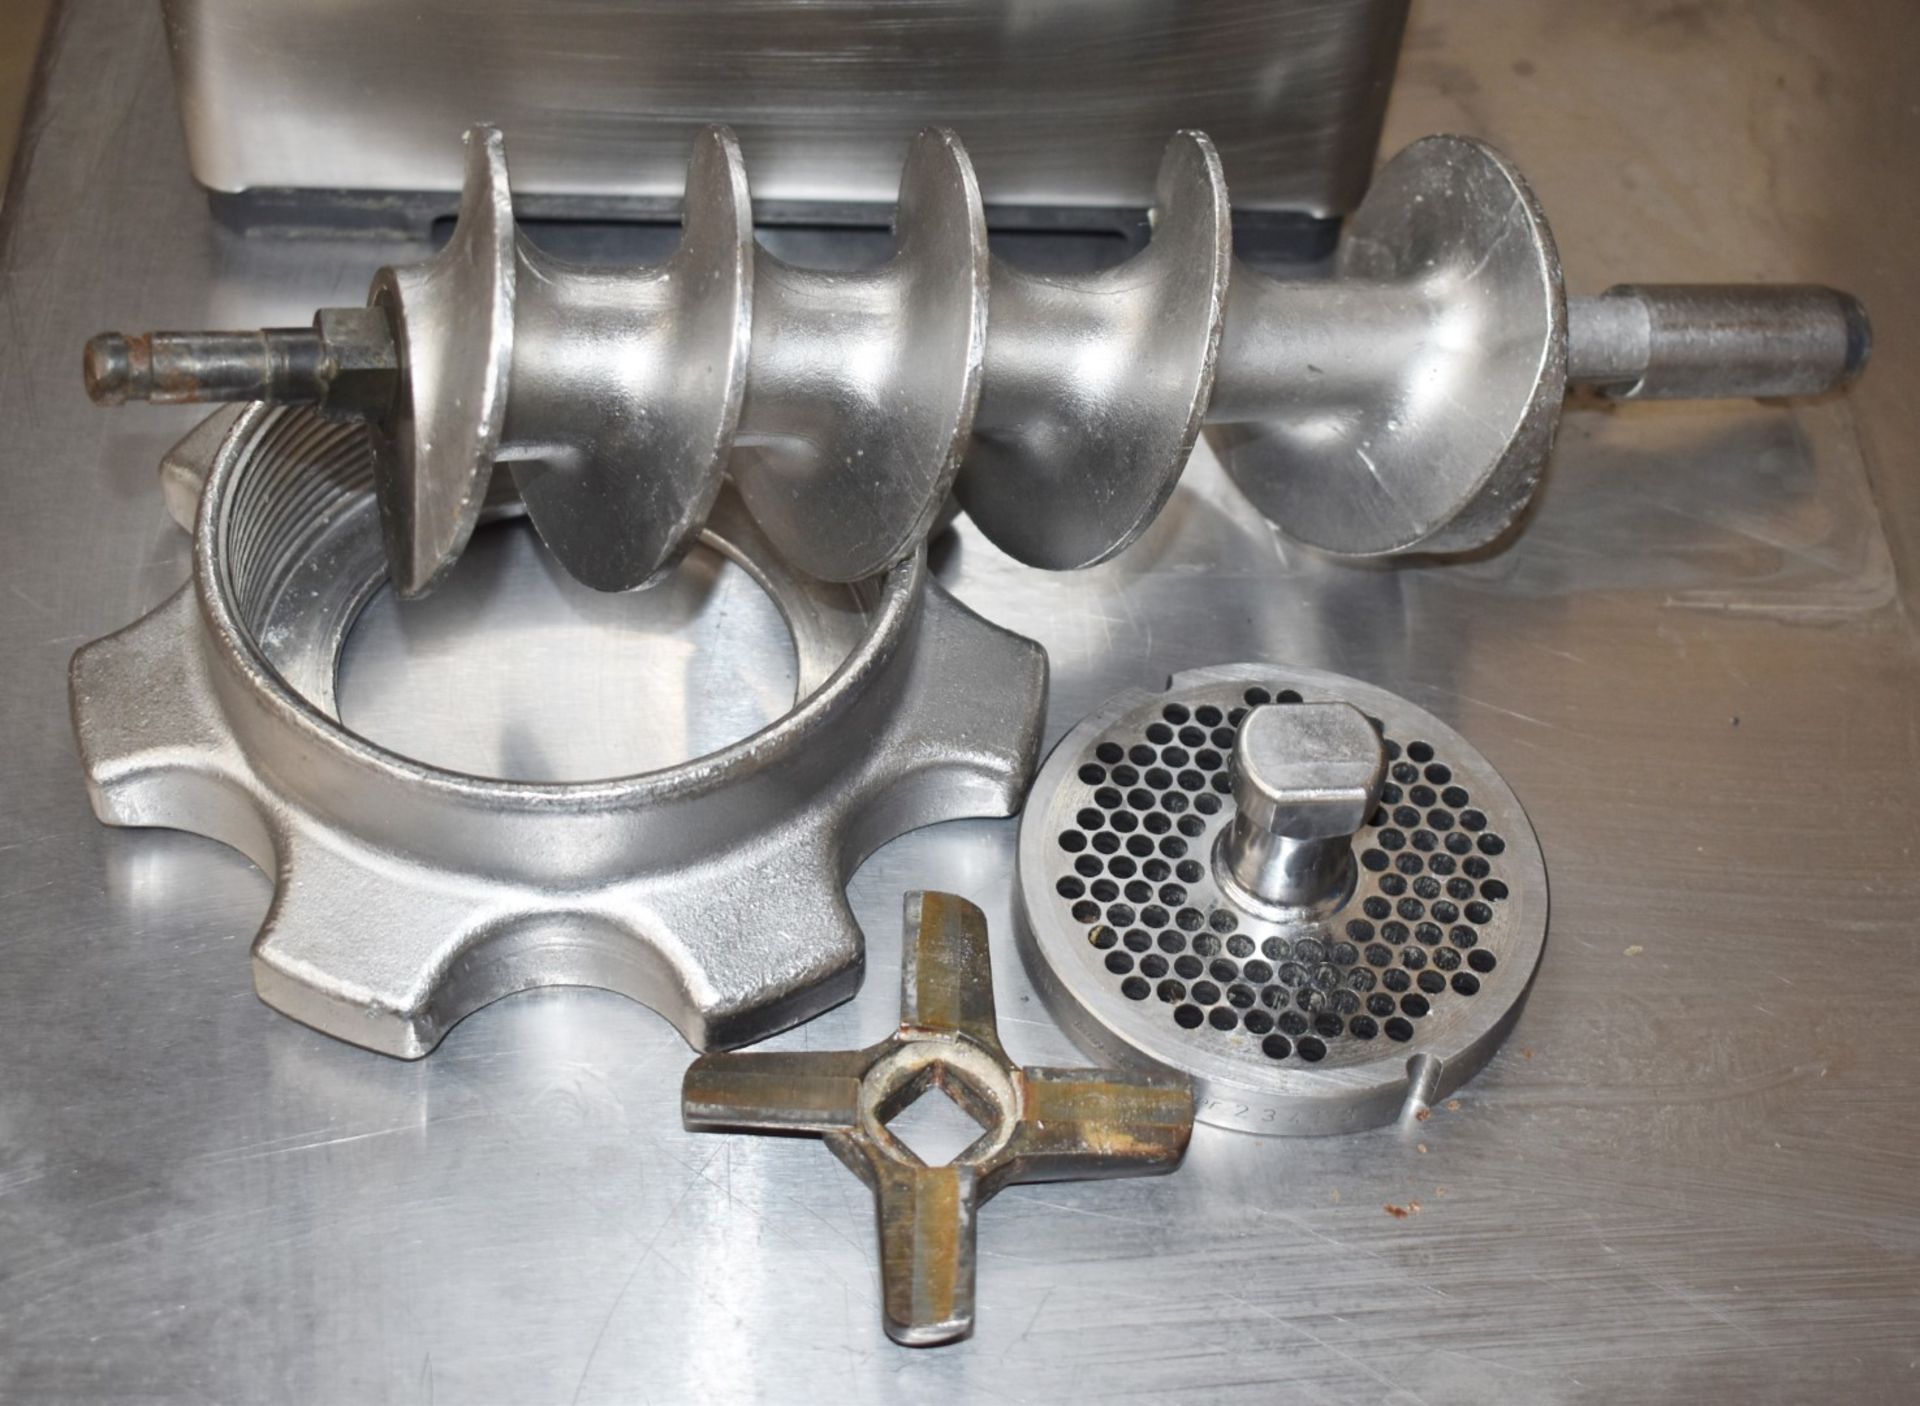 1 x Bizerba Meat Mincer - Stainless Steel Construction - Model FW-N 22/2 - 240v UK Plug - Recently - Image 12 of 12